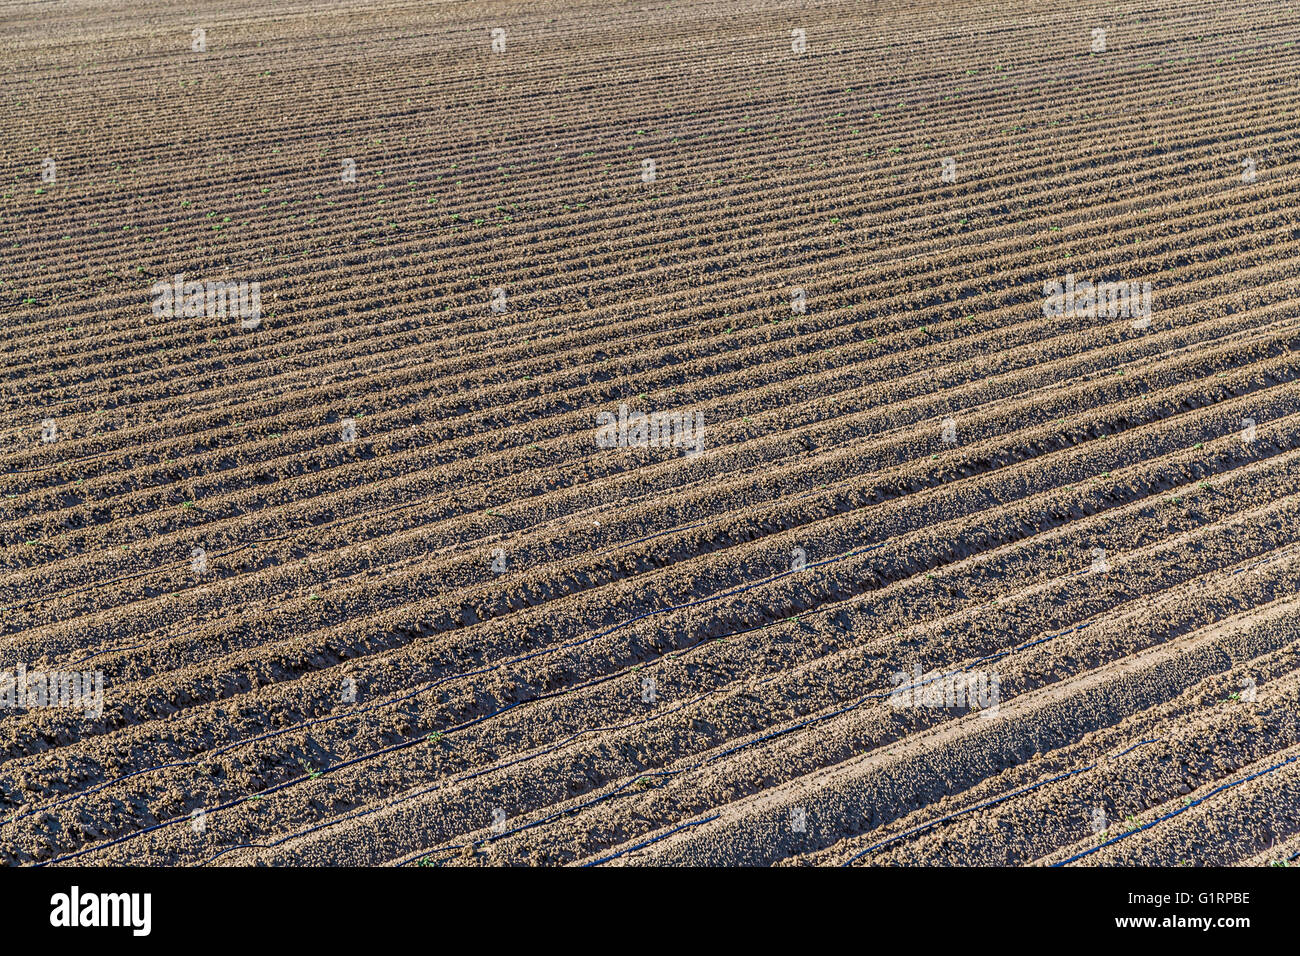 the furrows of a plowed field Stock Photo